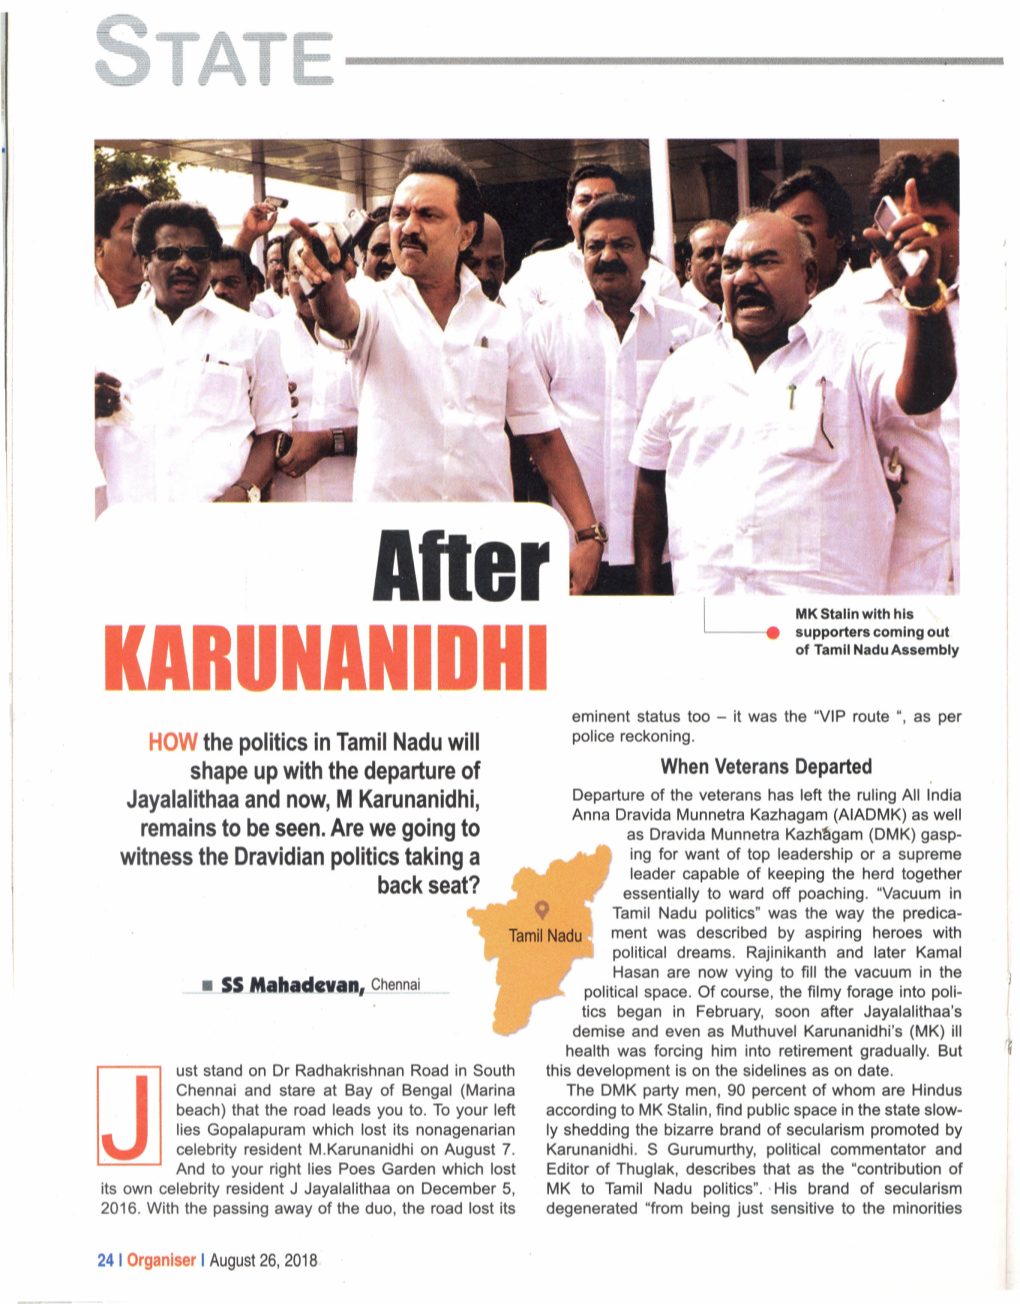 KARUNANIDHI of Tamil Nadu Assembly Eminent Status Too - It Was the "VIP Route ", As Per HOW the Politics in Tamil Nadu Will Police Reckoning